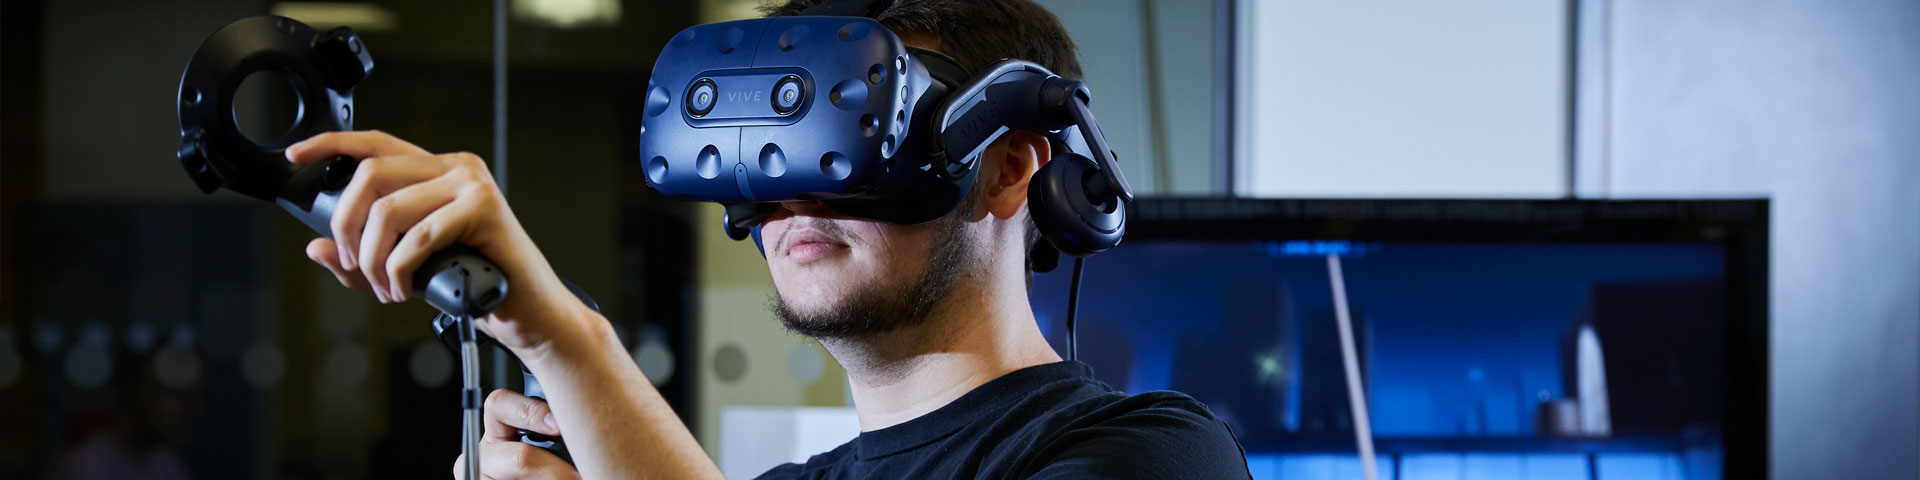 A person using virtual reality gear